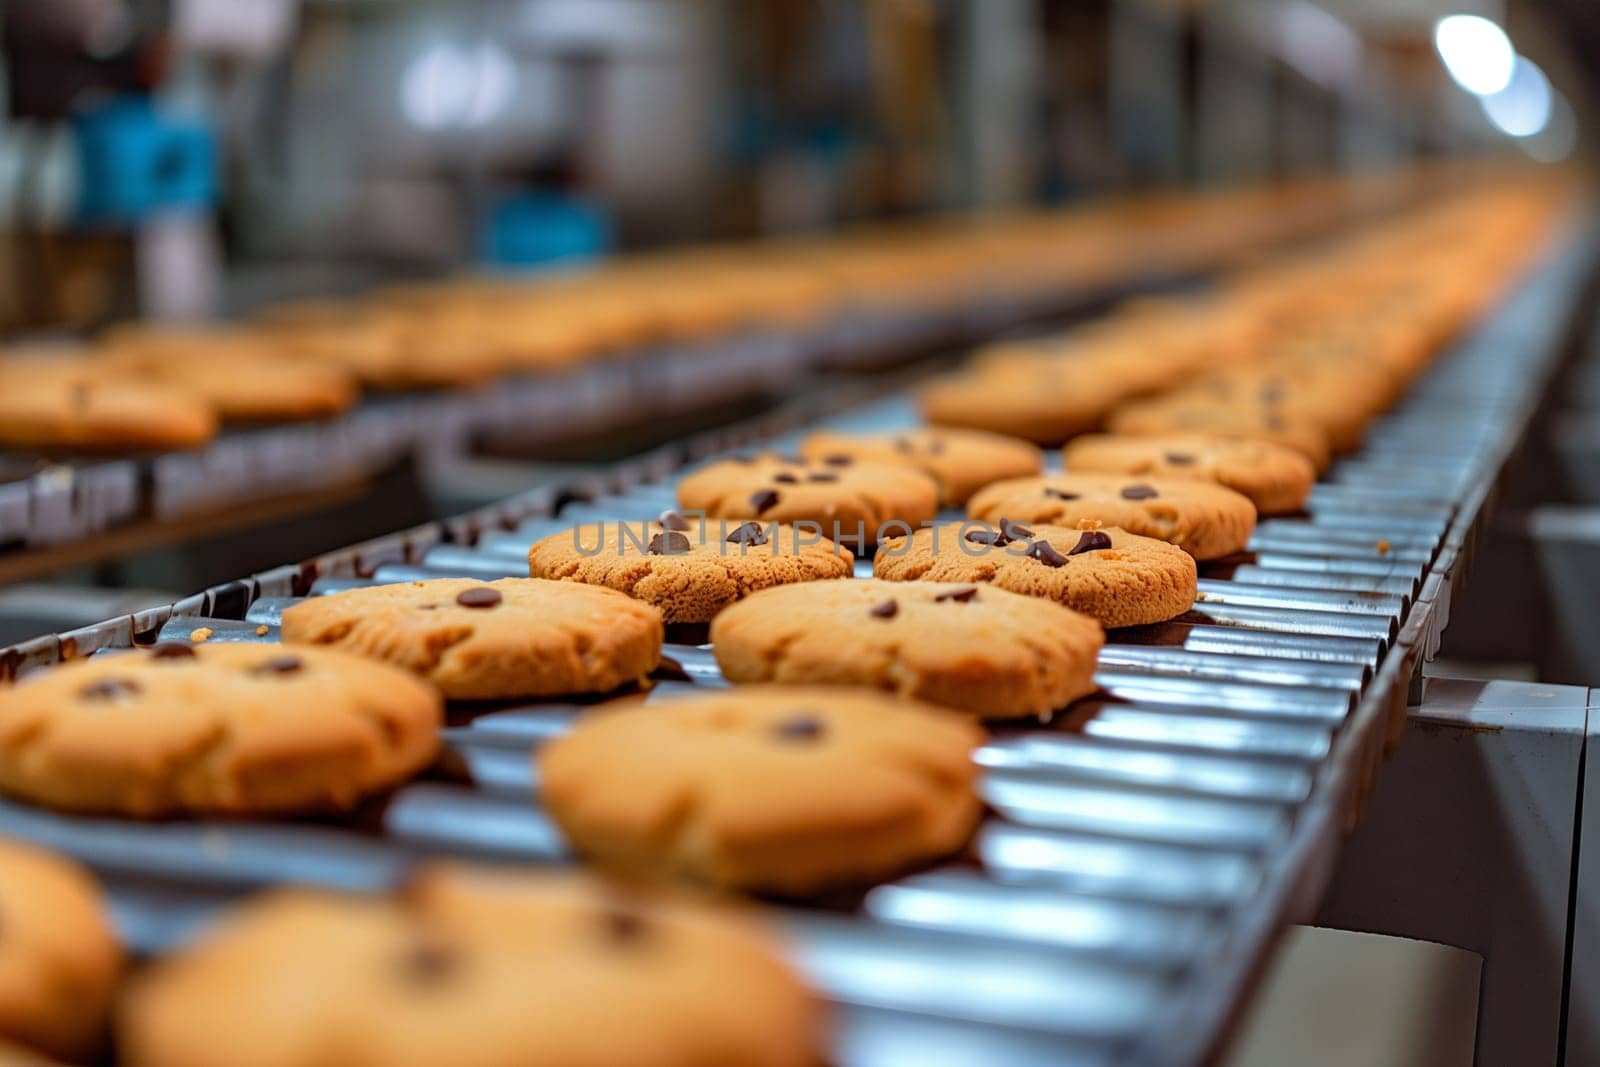 Chocolate Chip Cookies Cooling on a Conveyor Belt by Sd28DimoN_1976